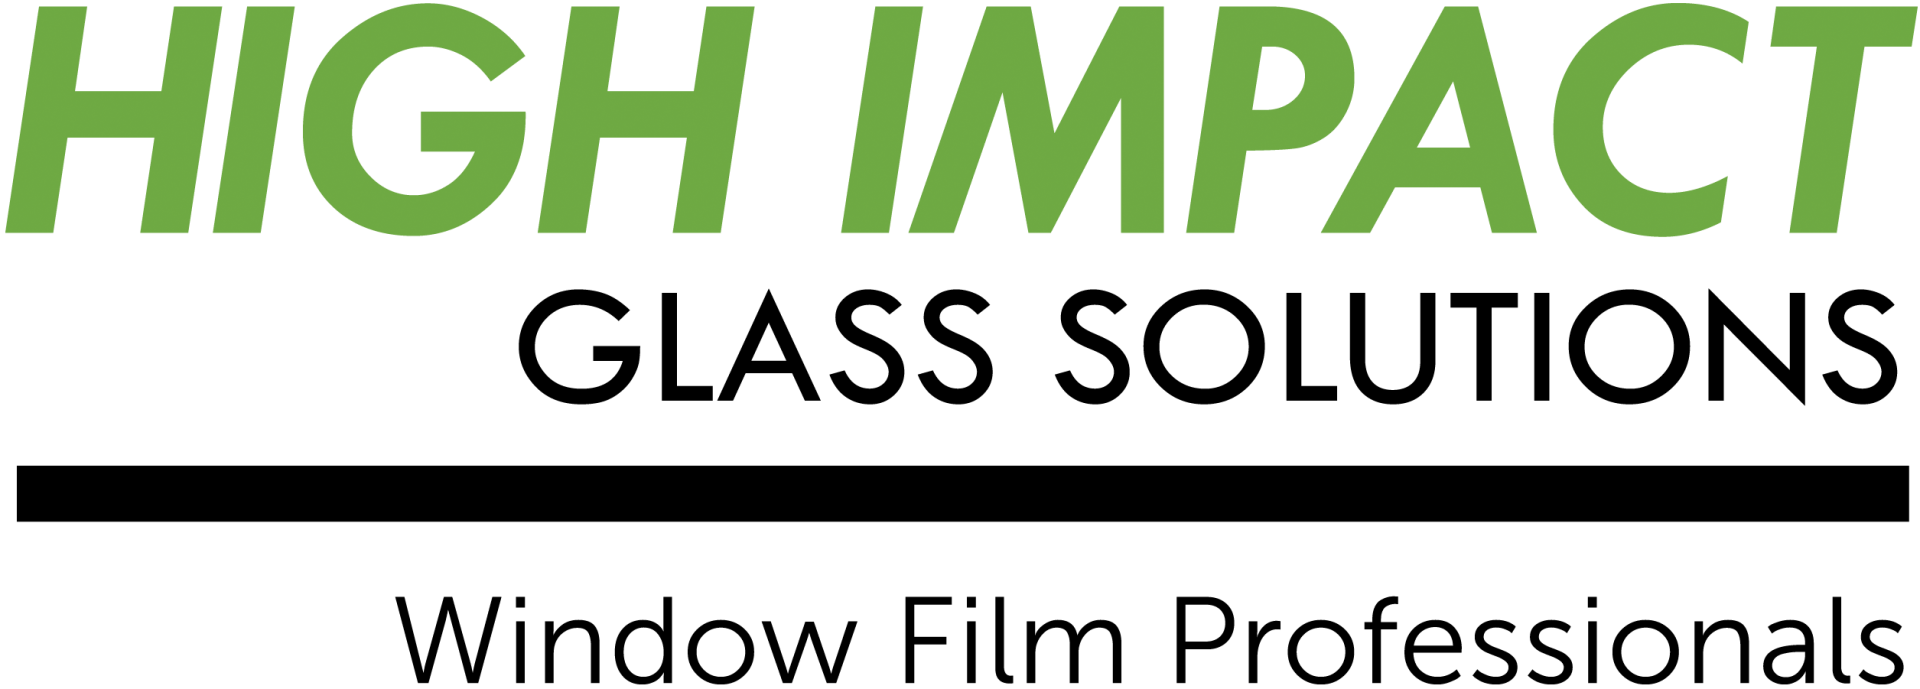 High Impact Glass Solutions